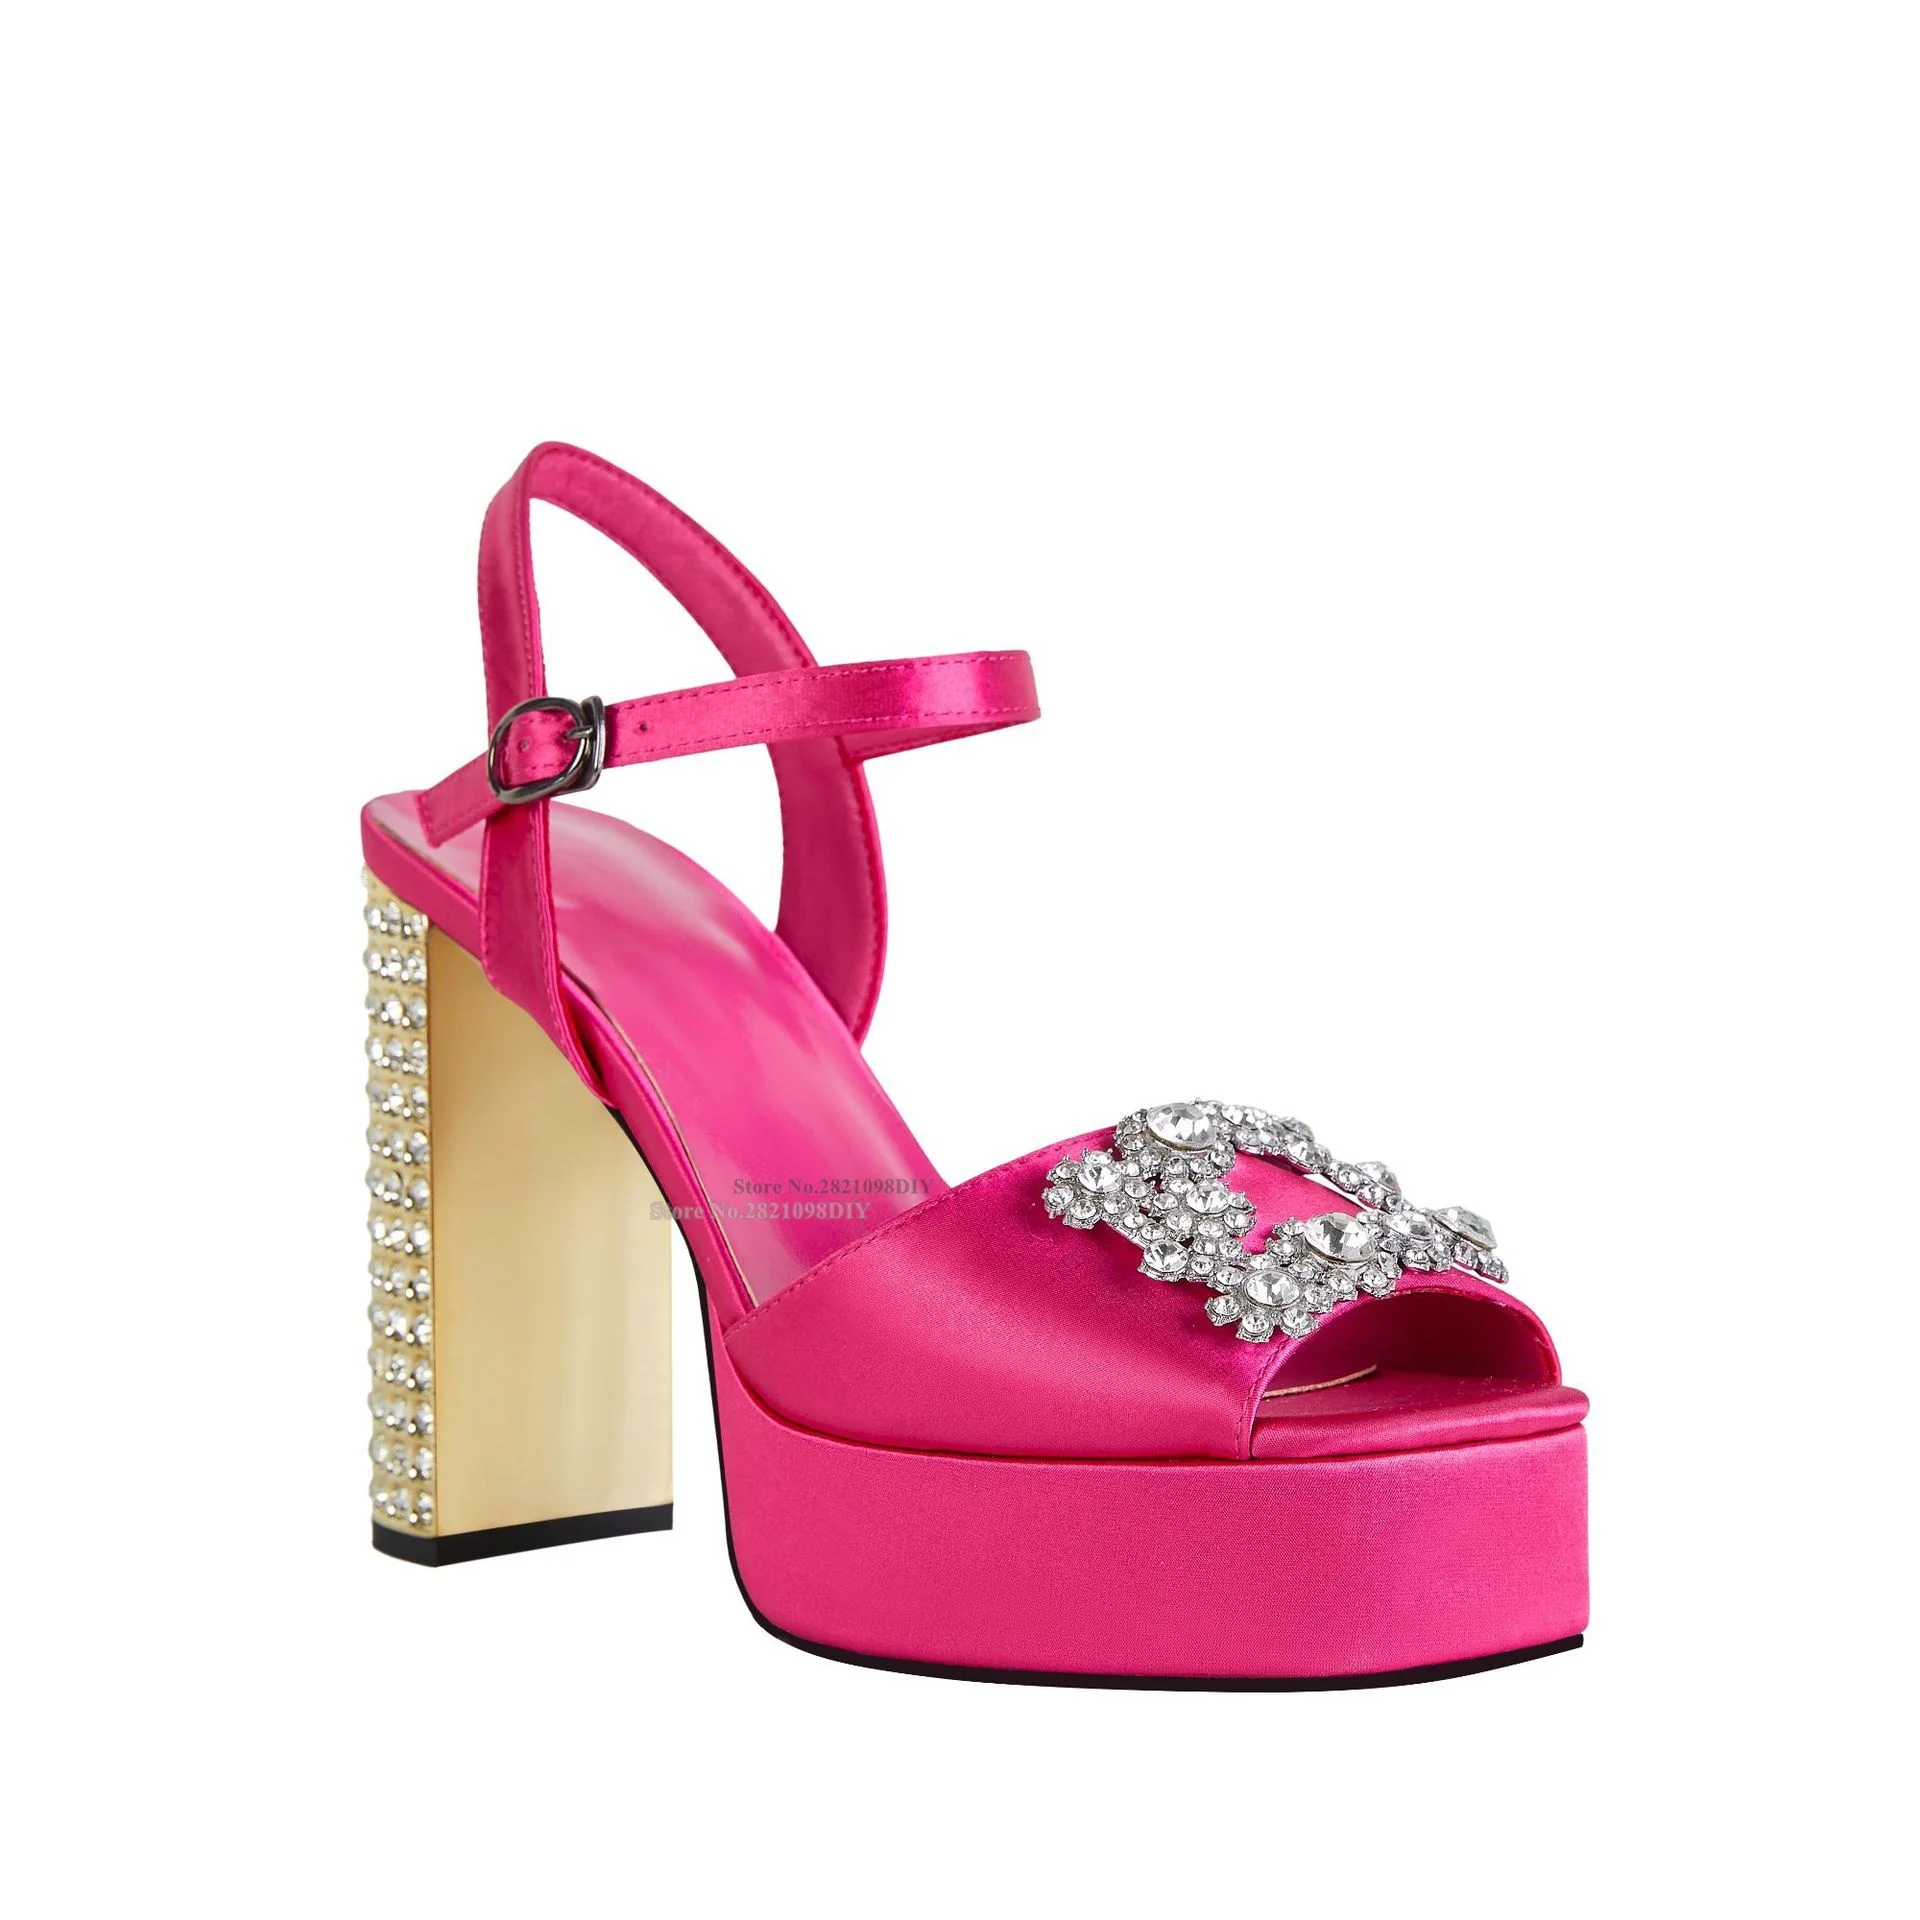 

Candy Color Satin Platform Peep Toe High Heel Sandals with Crystals Ankle Strap Twist Chunky Heeled Jew Women Party Shoes